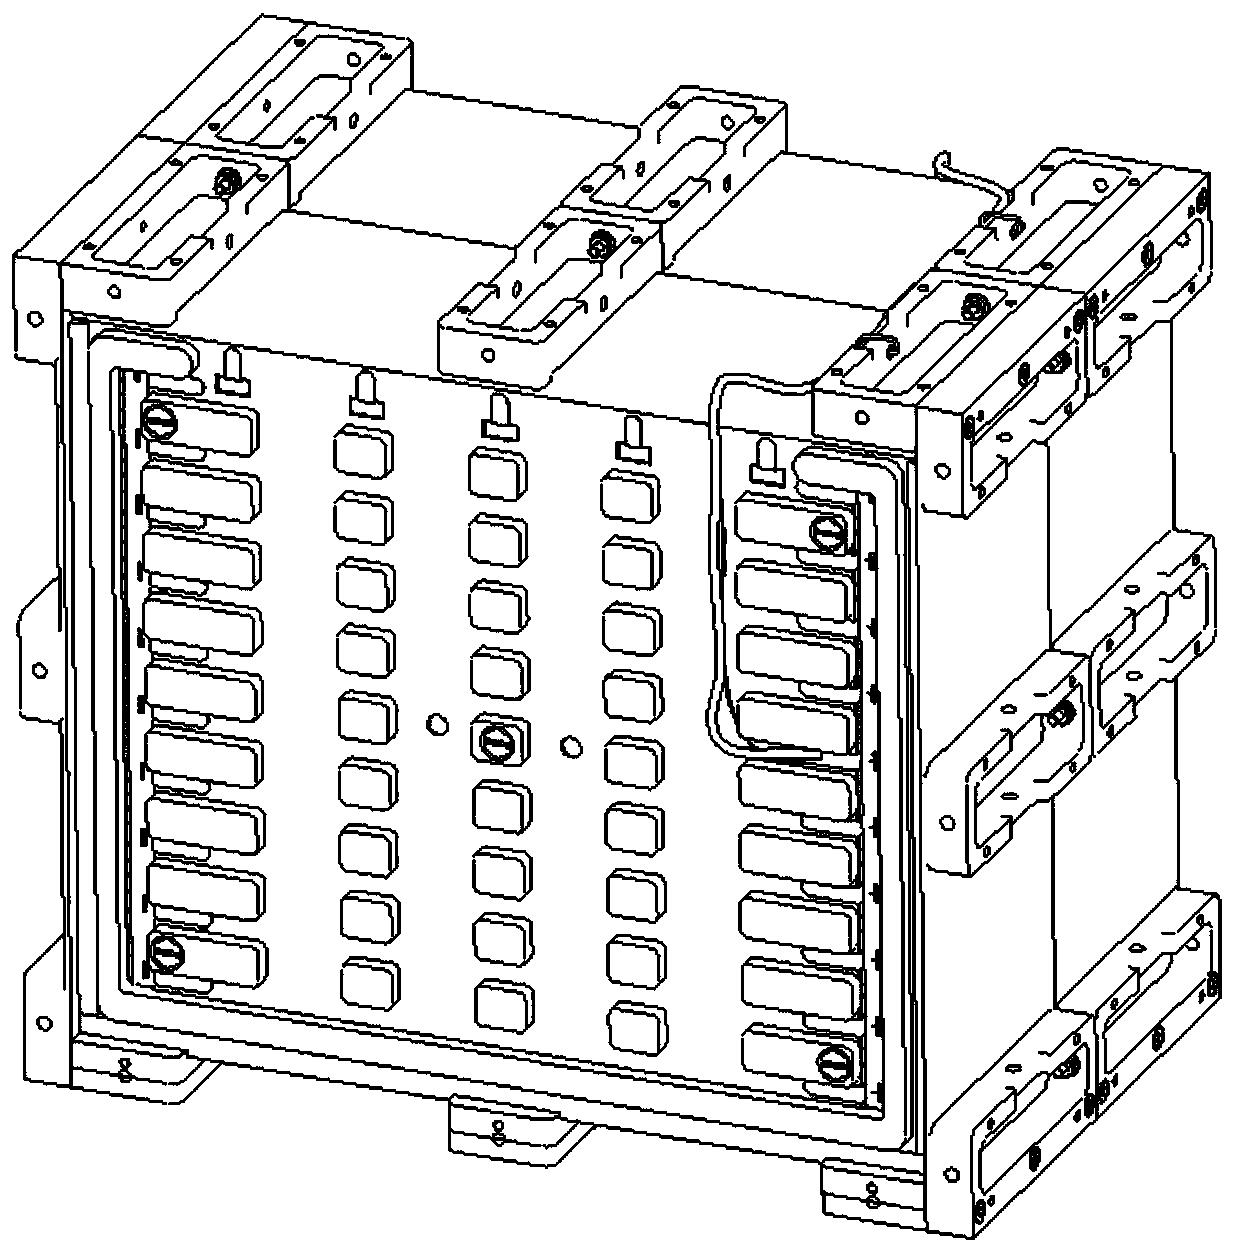 Modular lithium ion storage battery pack for carrier rocket